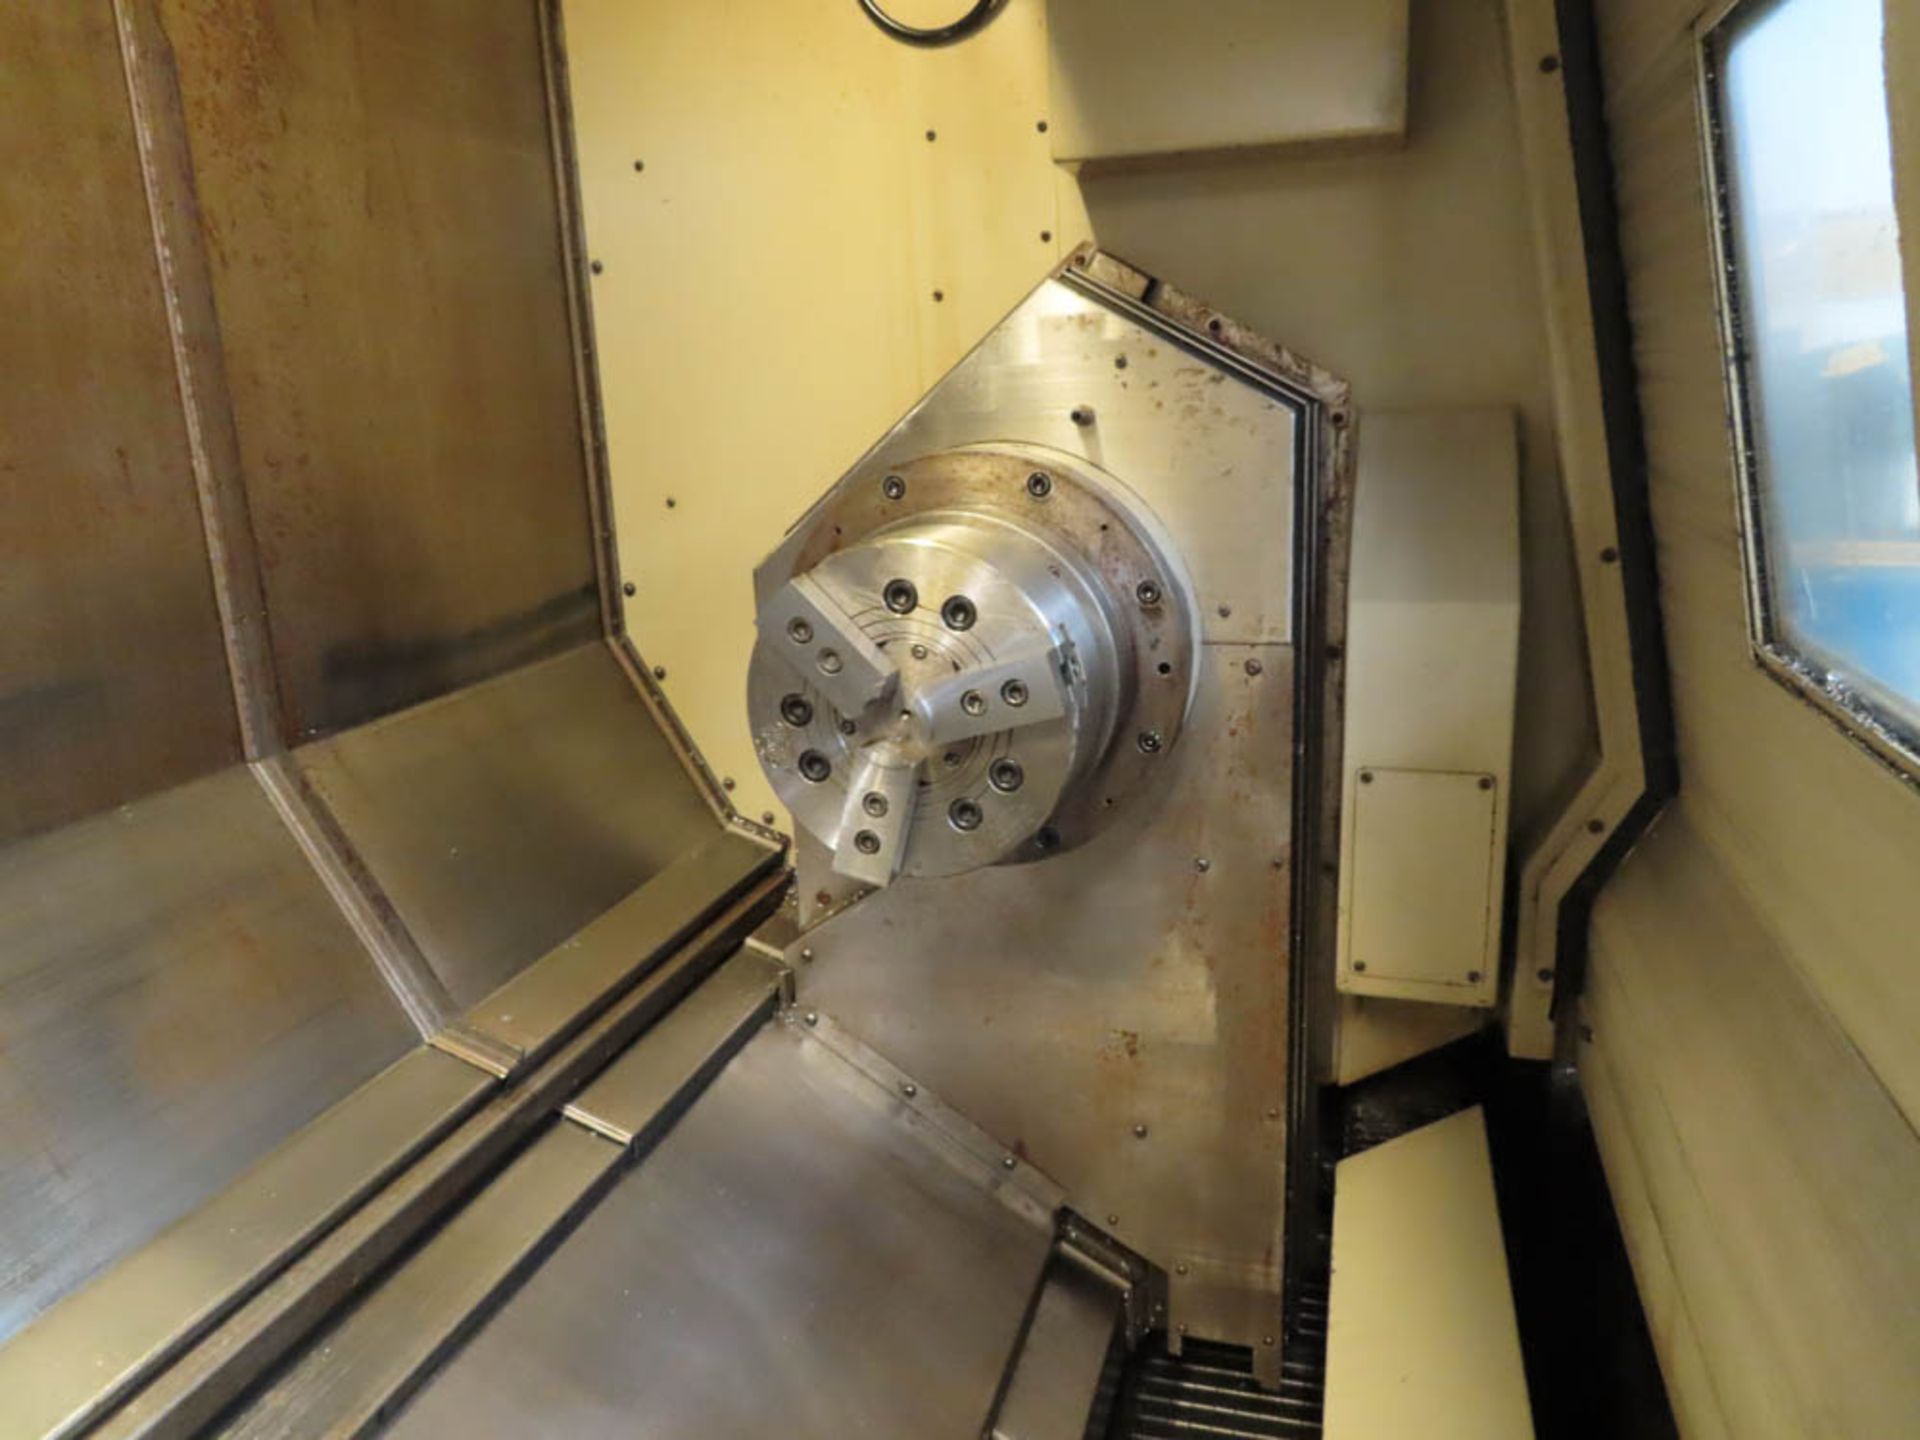 MAZAK "INTEGREX" 400-IIIST 5-AXIS CNC TURNING / MILLING CENTER, W/ SUB-SPINDLE, LOWER TURRET - Image 7 of 16